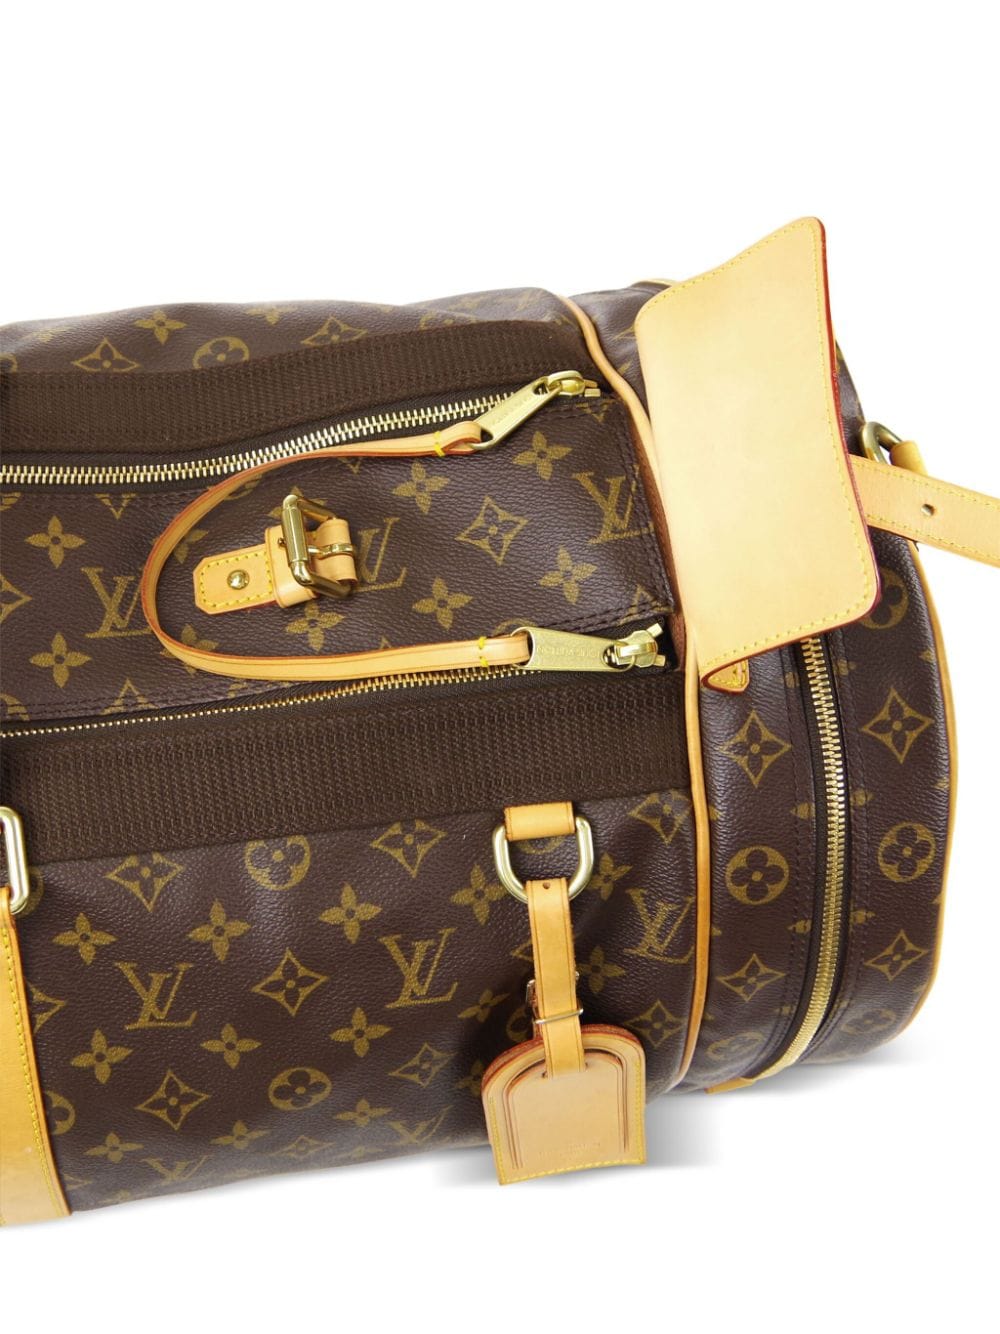 Louis Vuitton 2004 Pre-owned Monogram side-compartments Duffle Bag - Brown